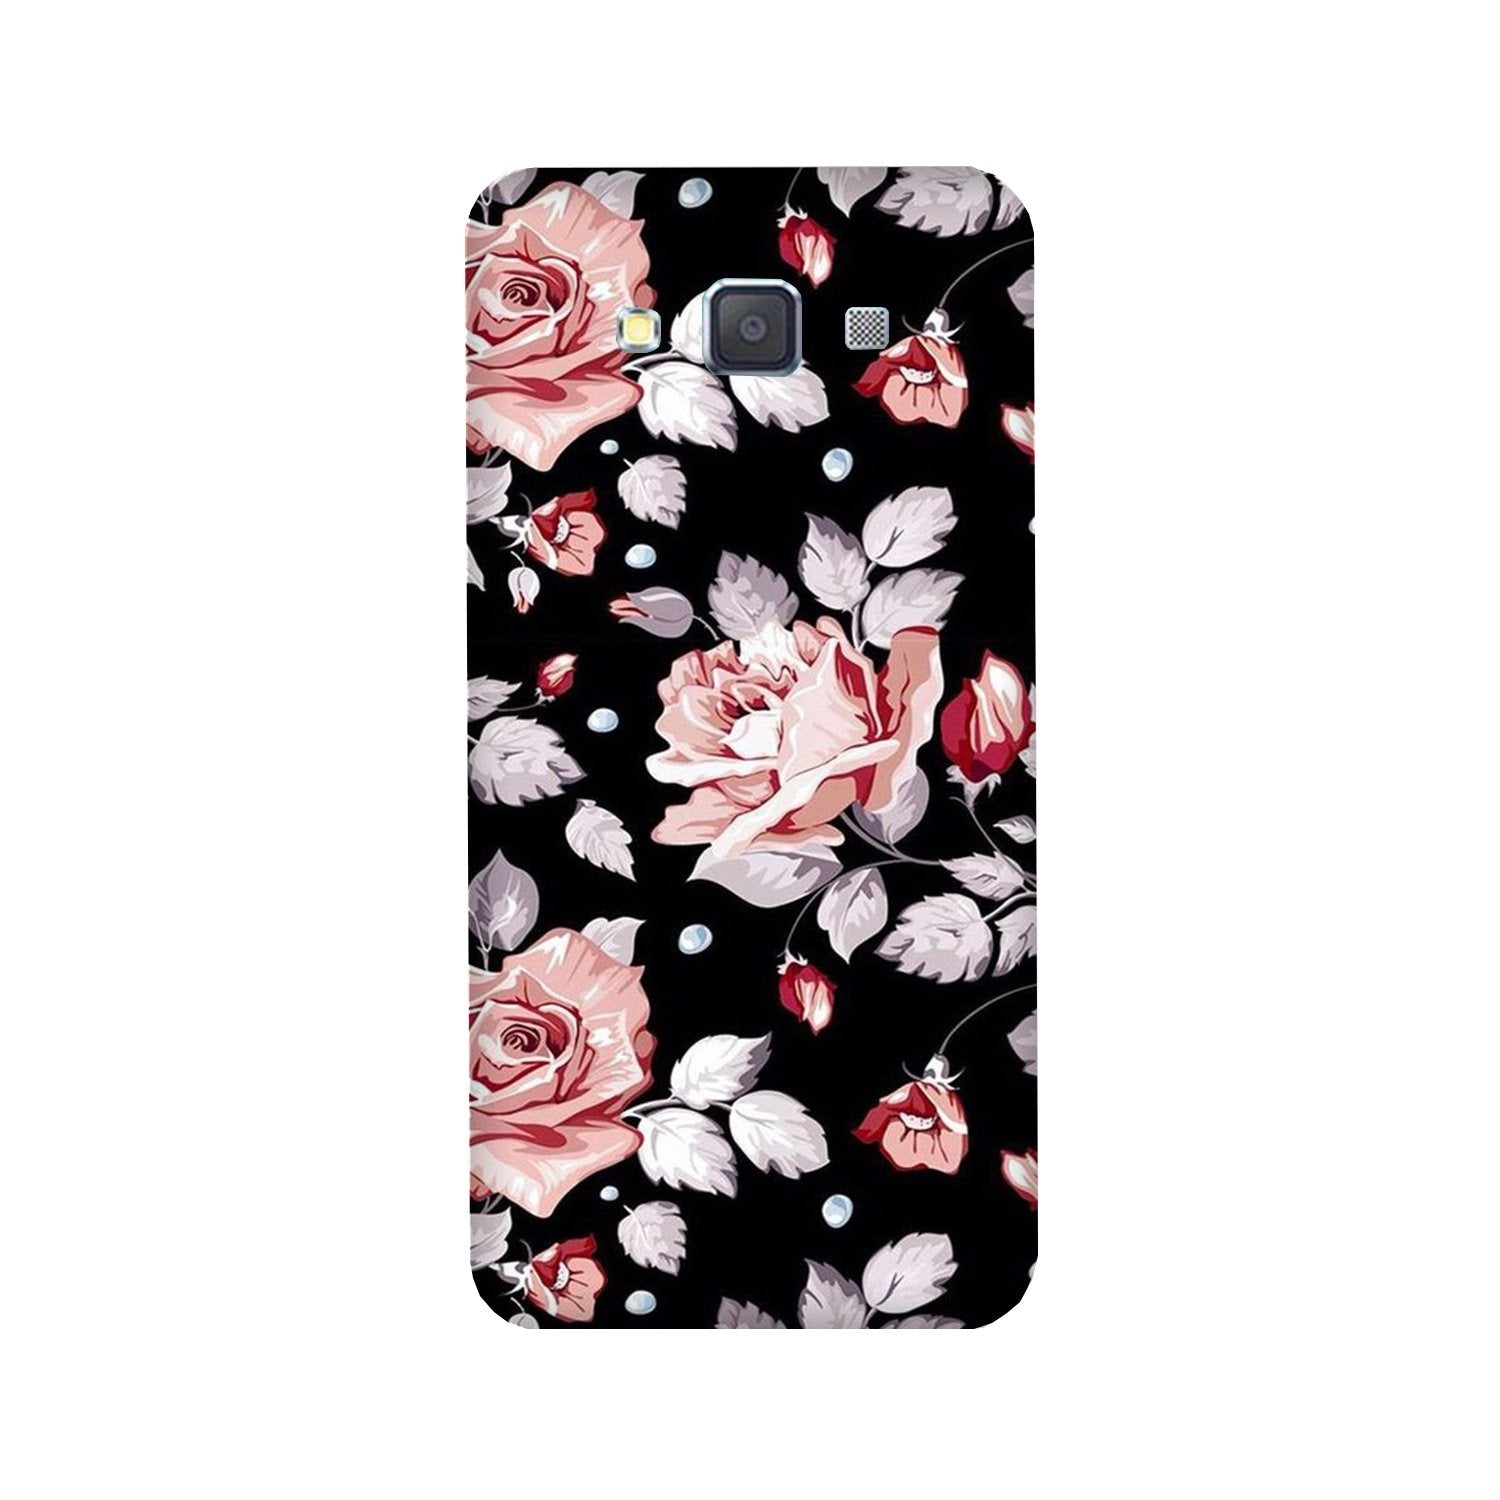 Pink rose Case for Galaxy E7